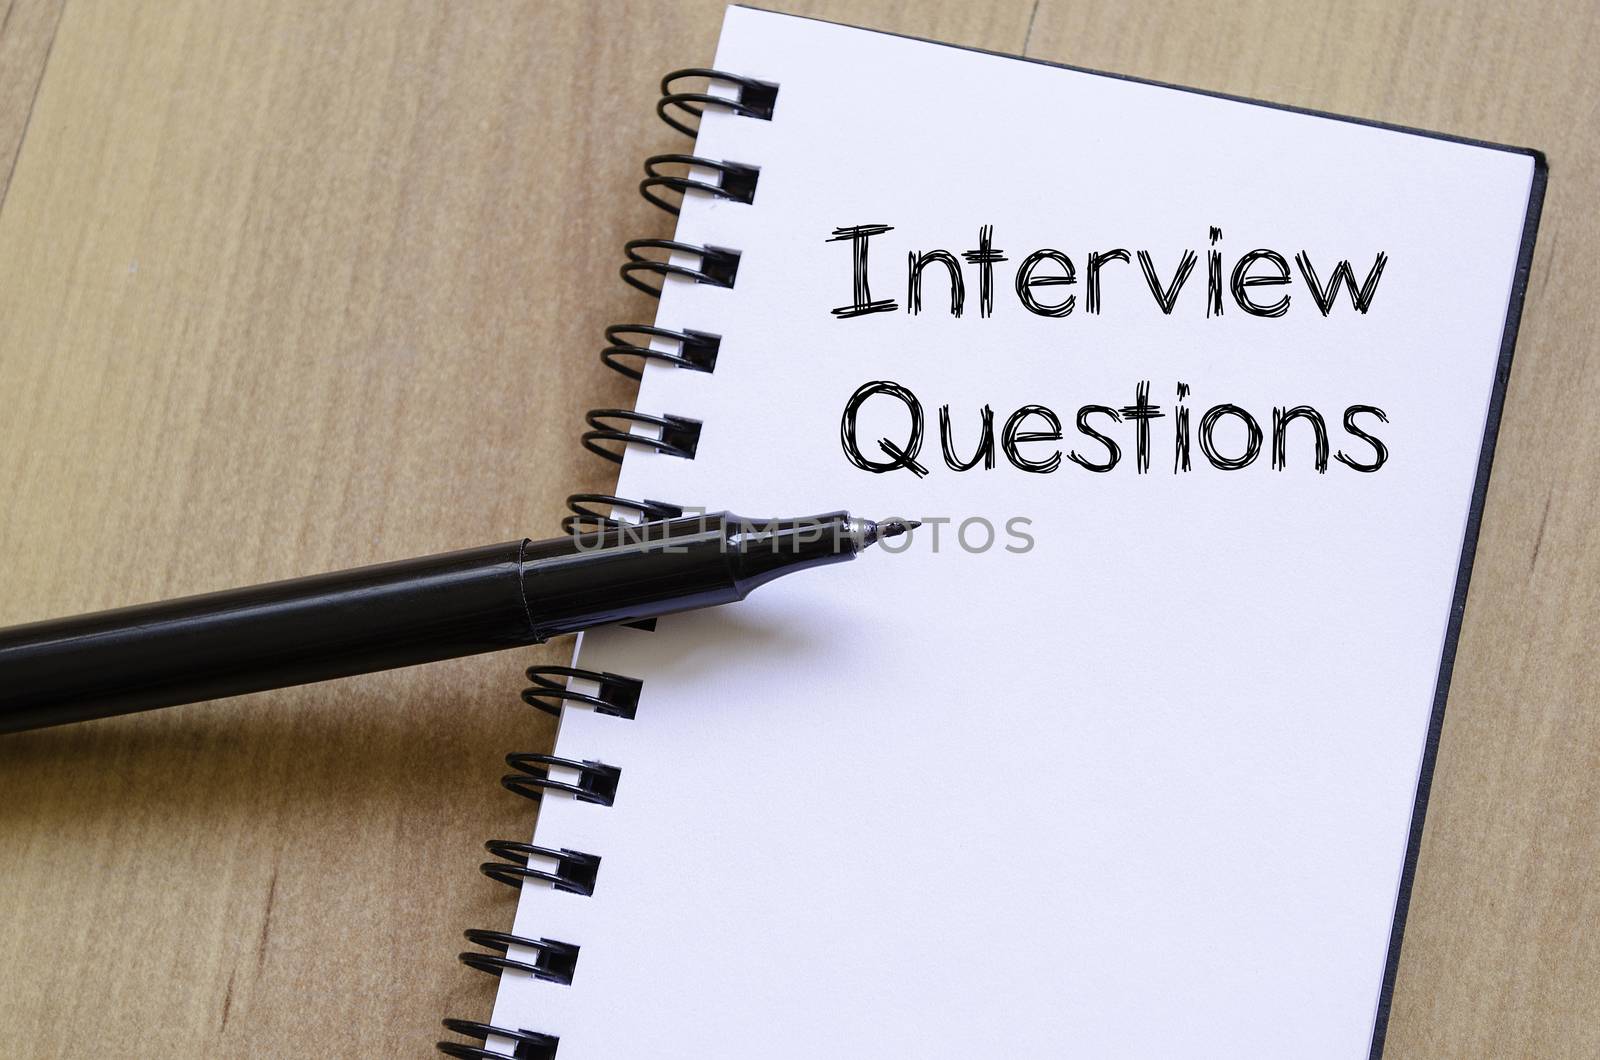 Interview questions write on notebook by eenevski